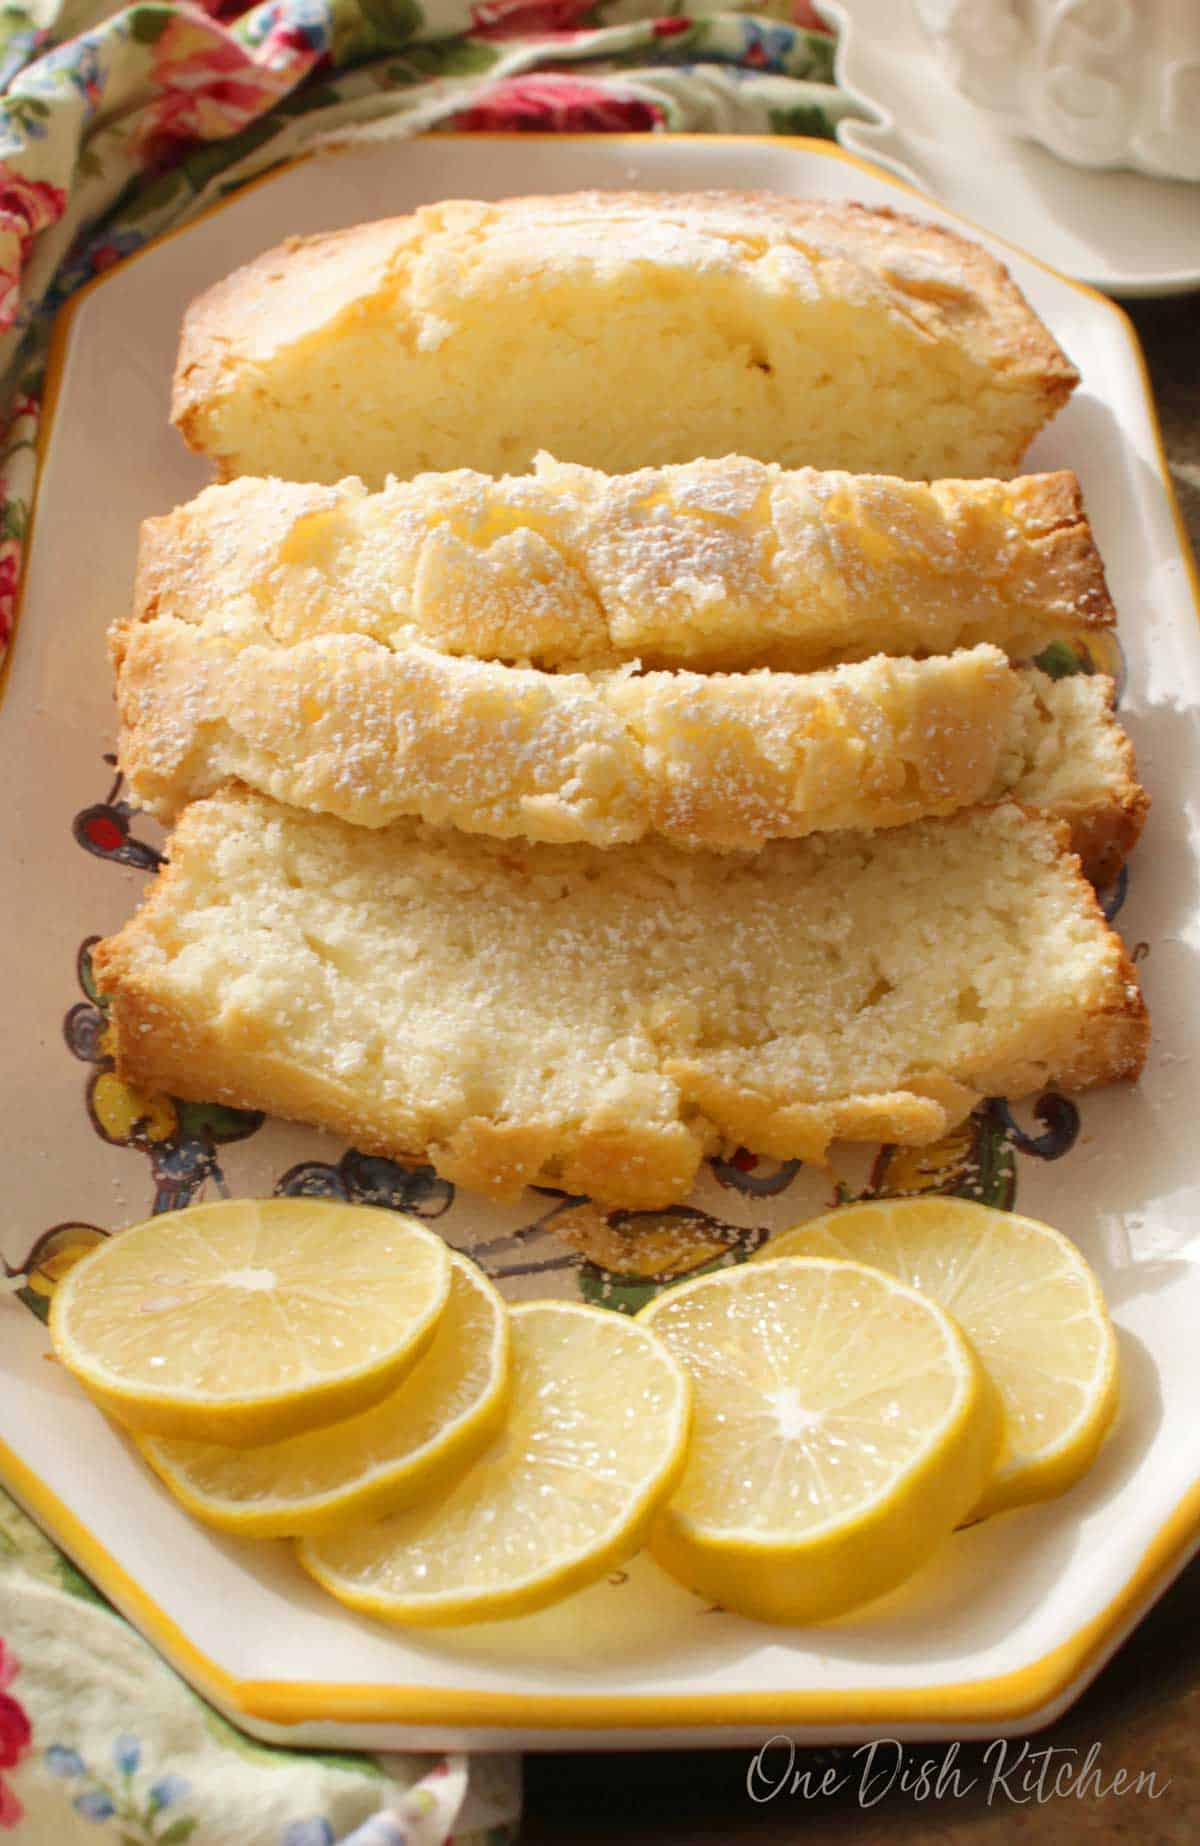 Four slices of pound cake dusted with powdered sugar on a plate with five decorative lemon wheels